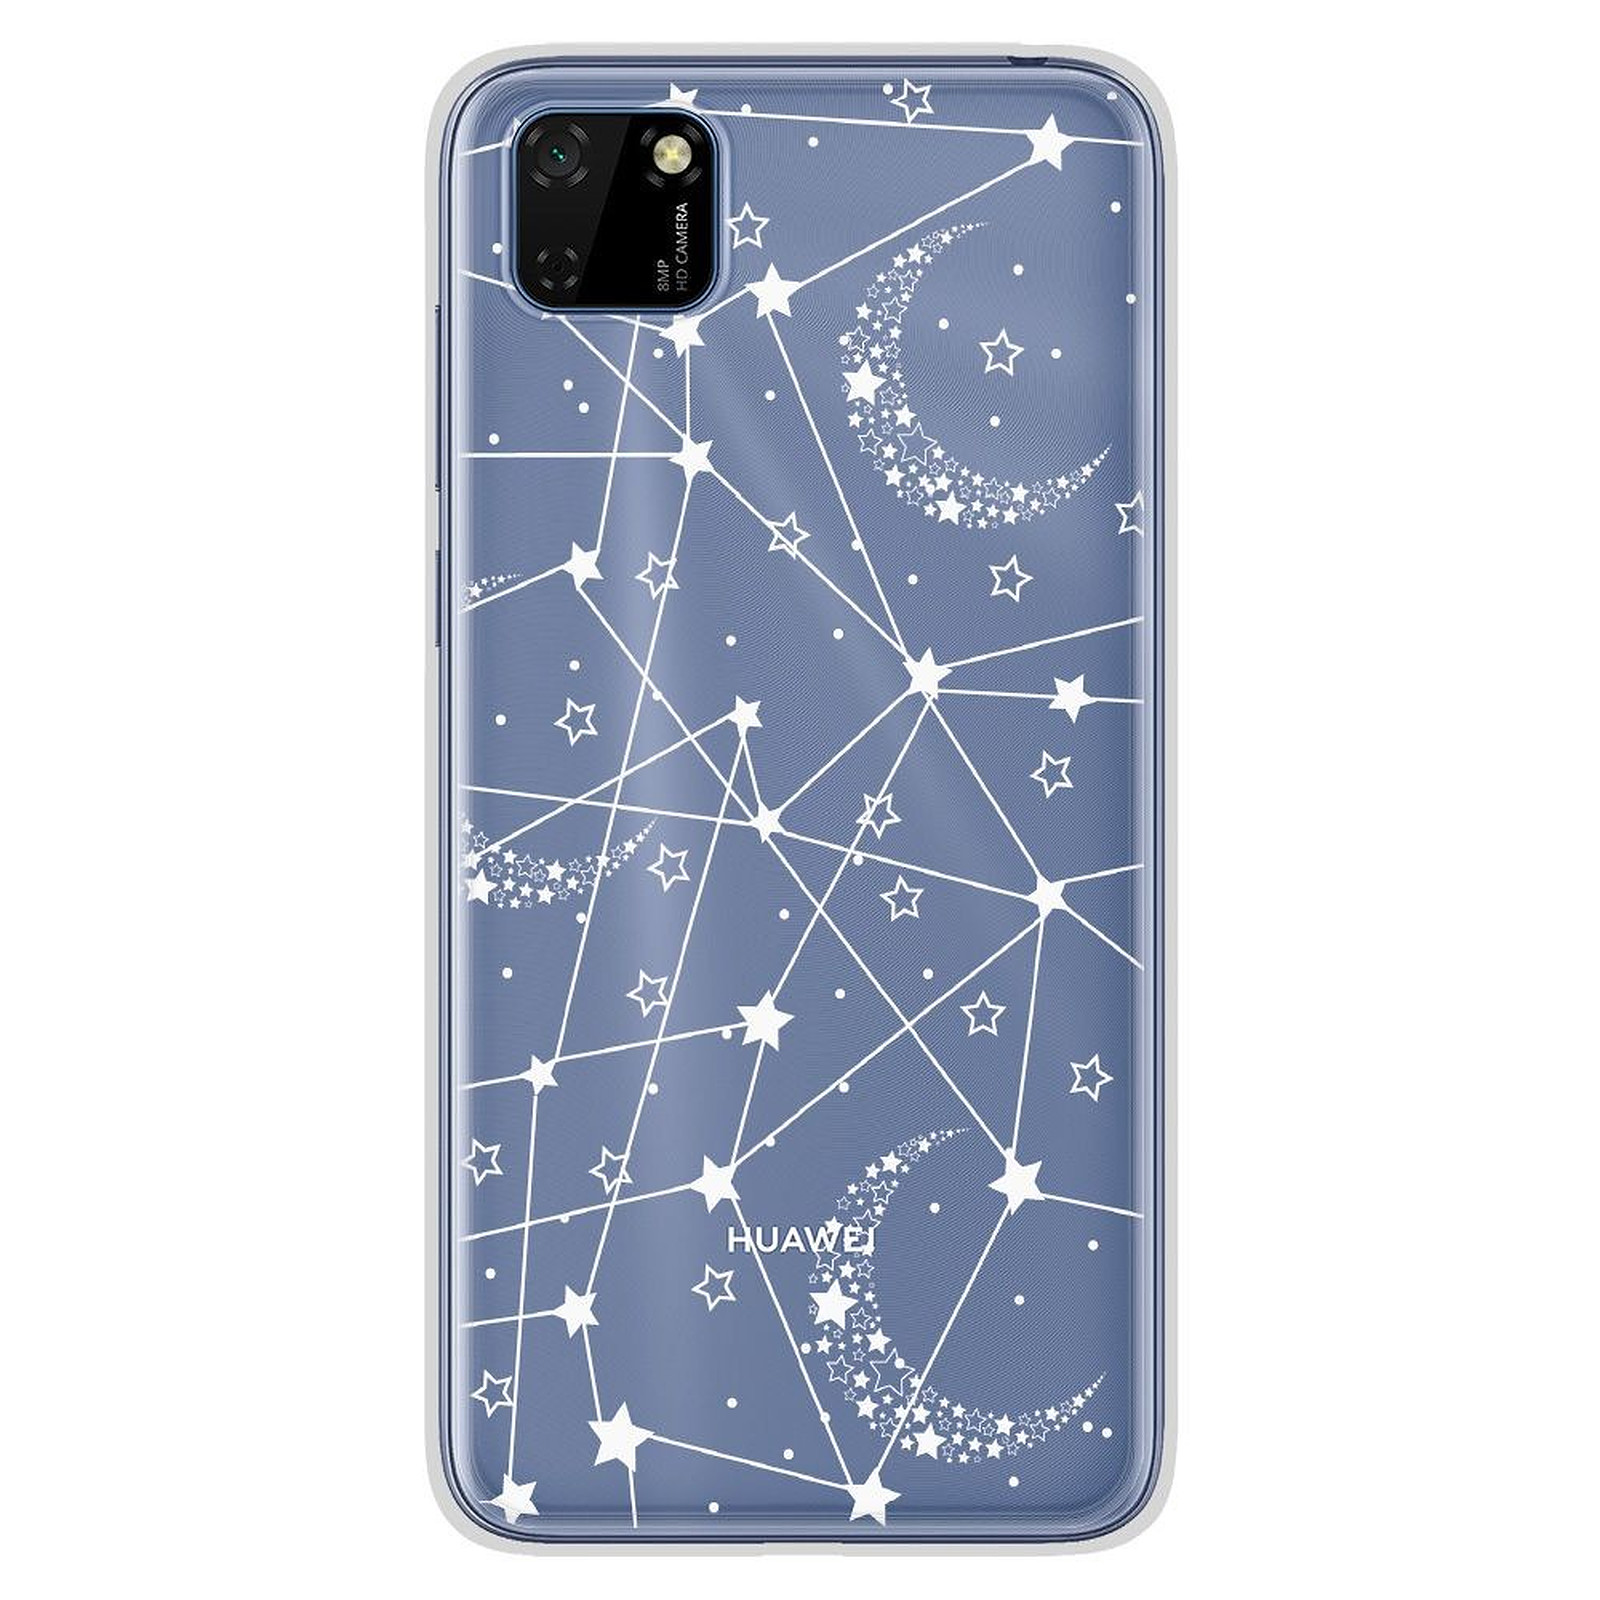 1001 Coques Coque silicone gel Huawei Y5P motif Lignes etoilees - Coque telephone 1001Coques